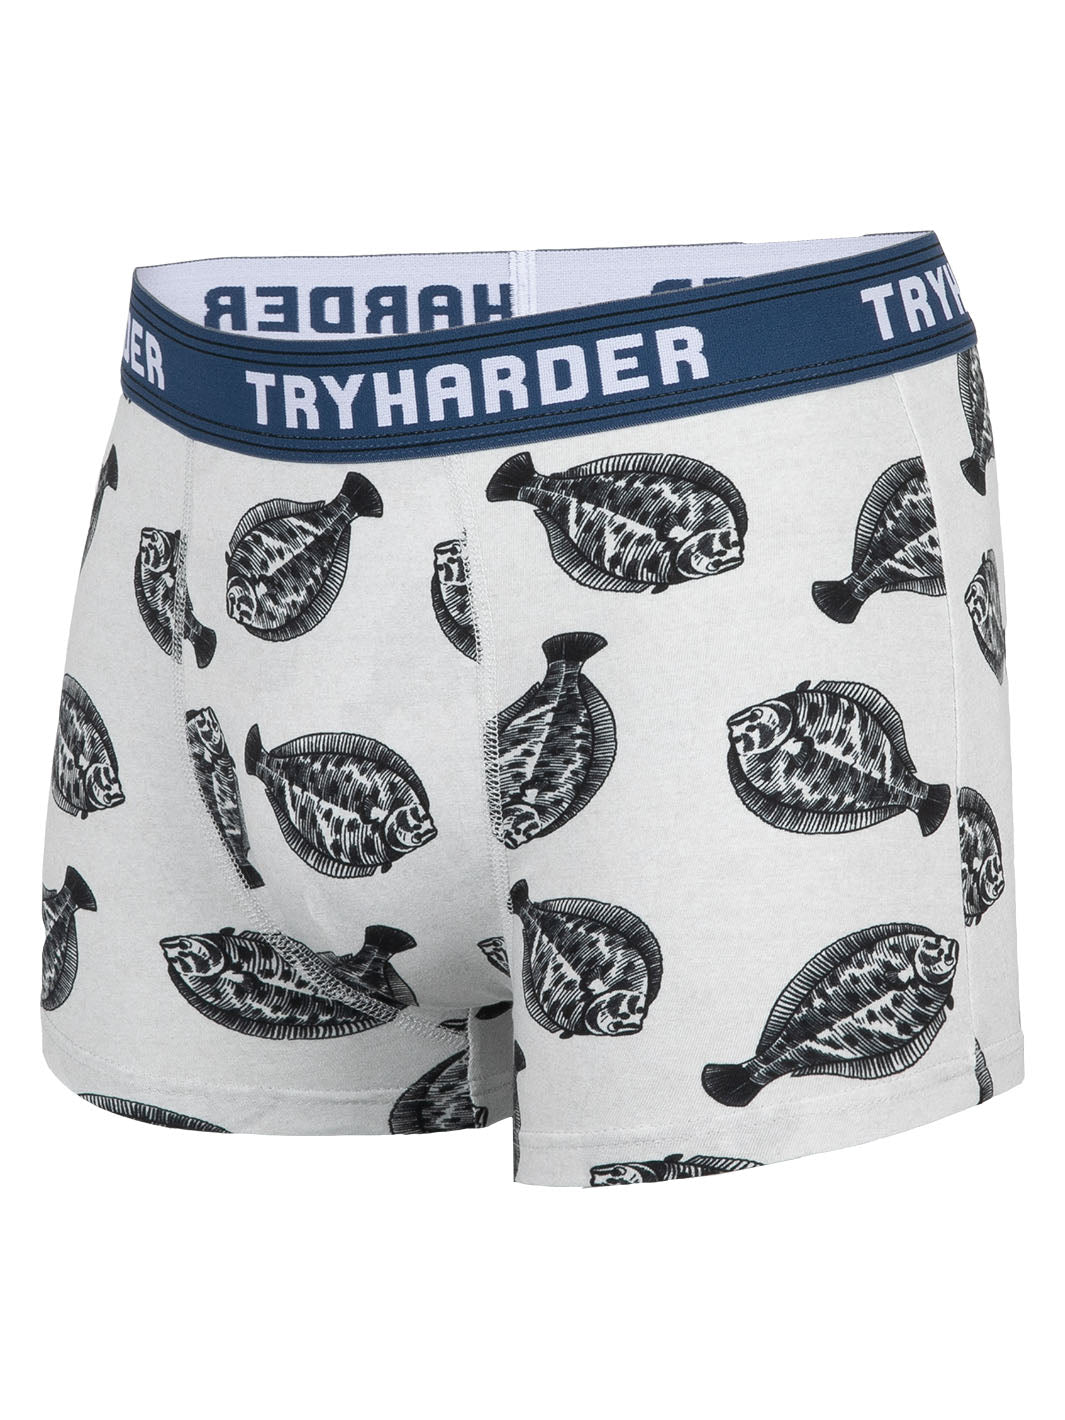 TRYHARDER - Boxer - Fish Grey 1 pack